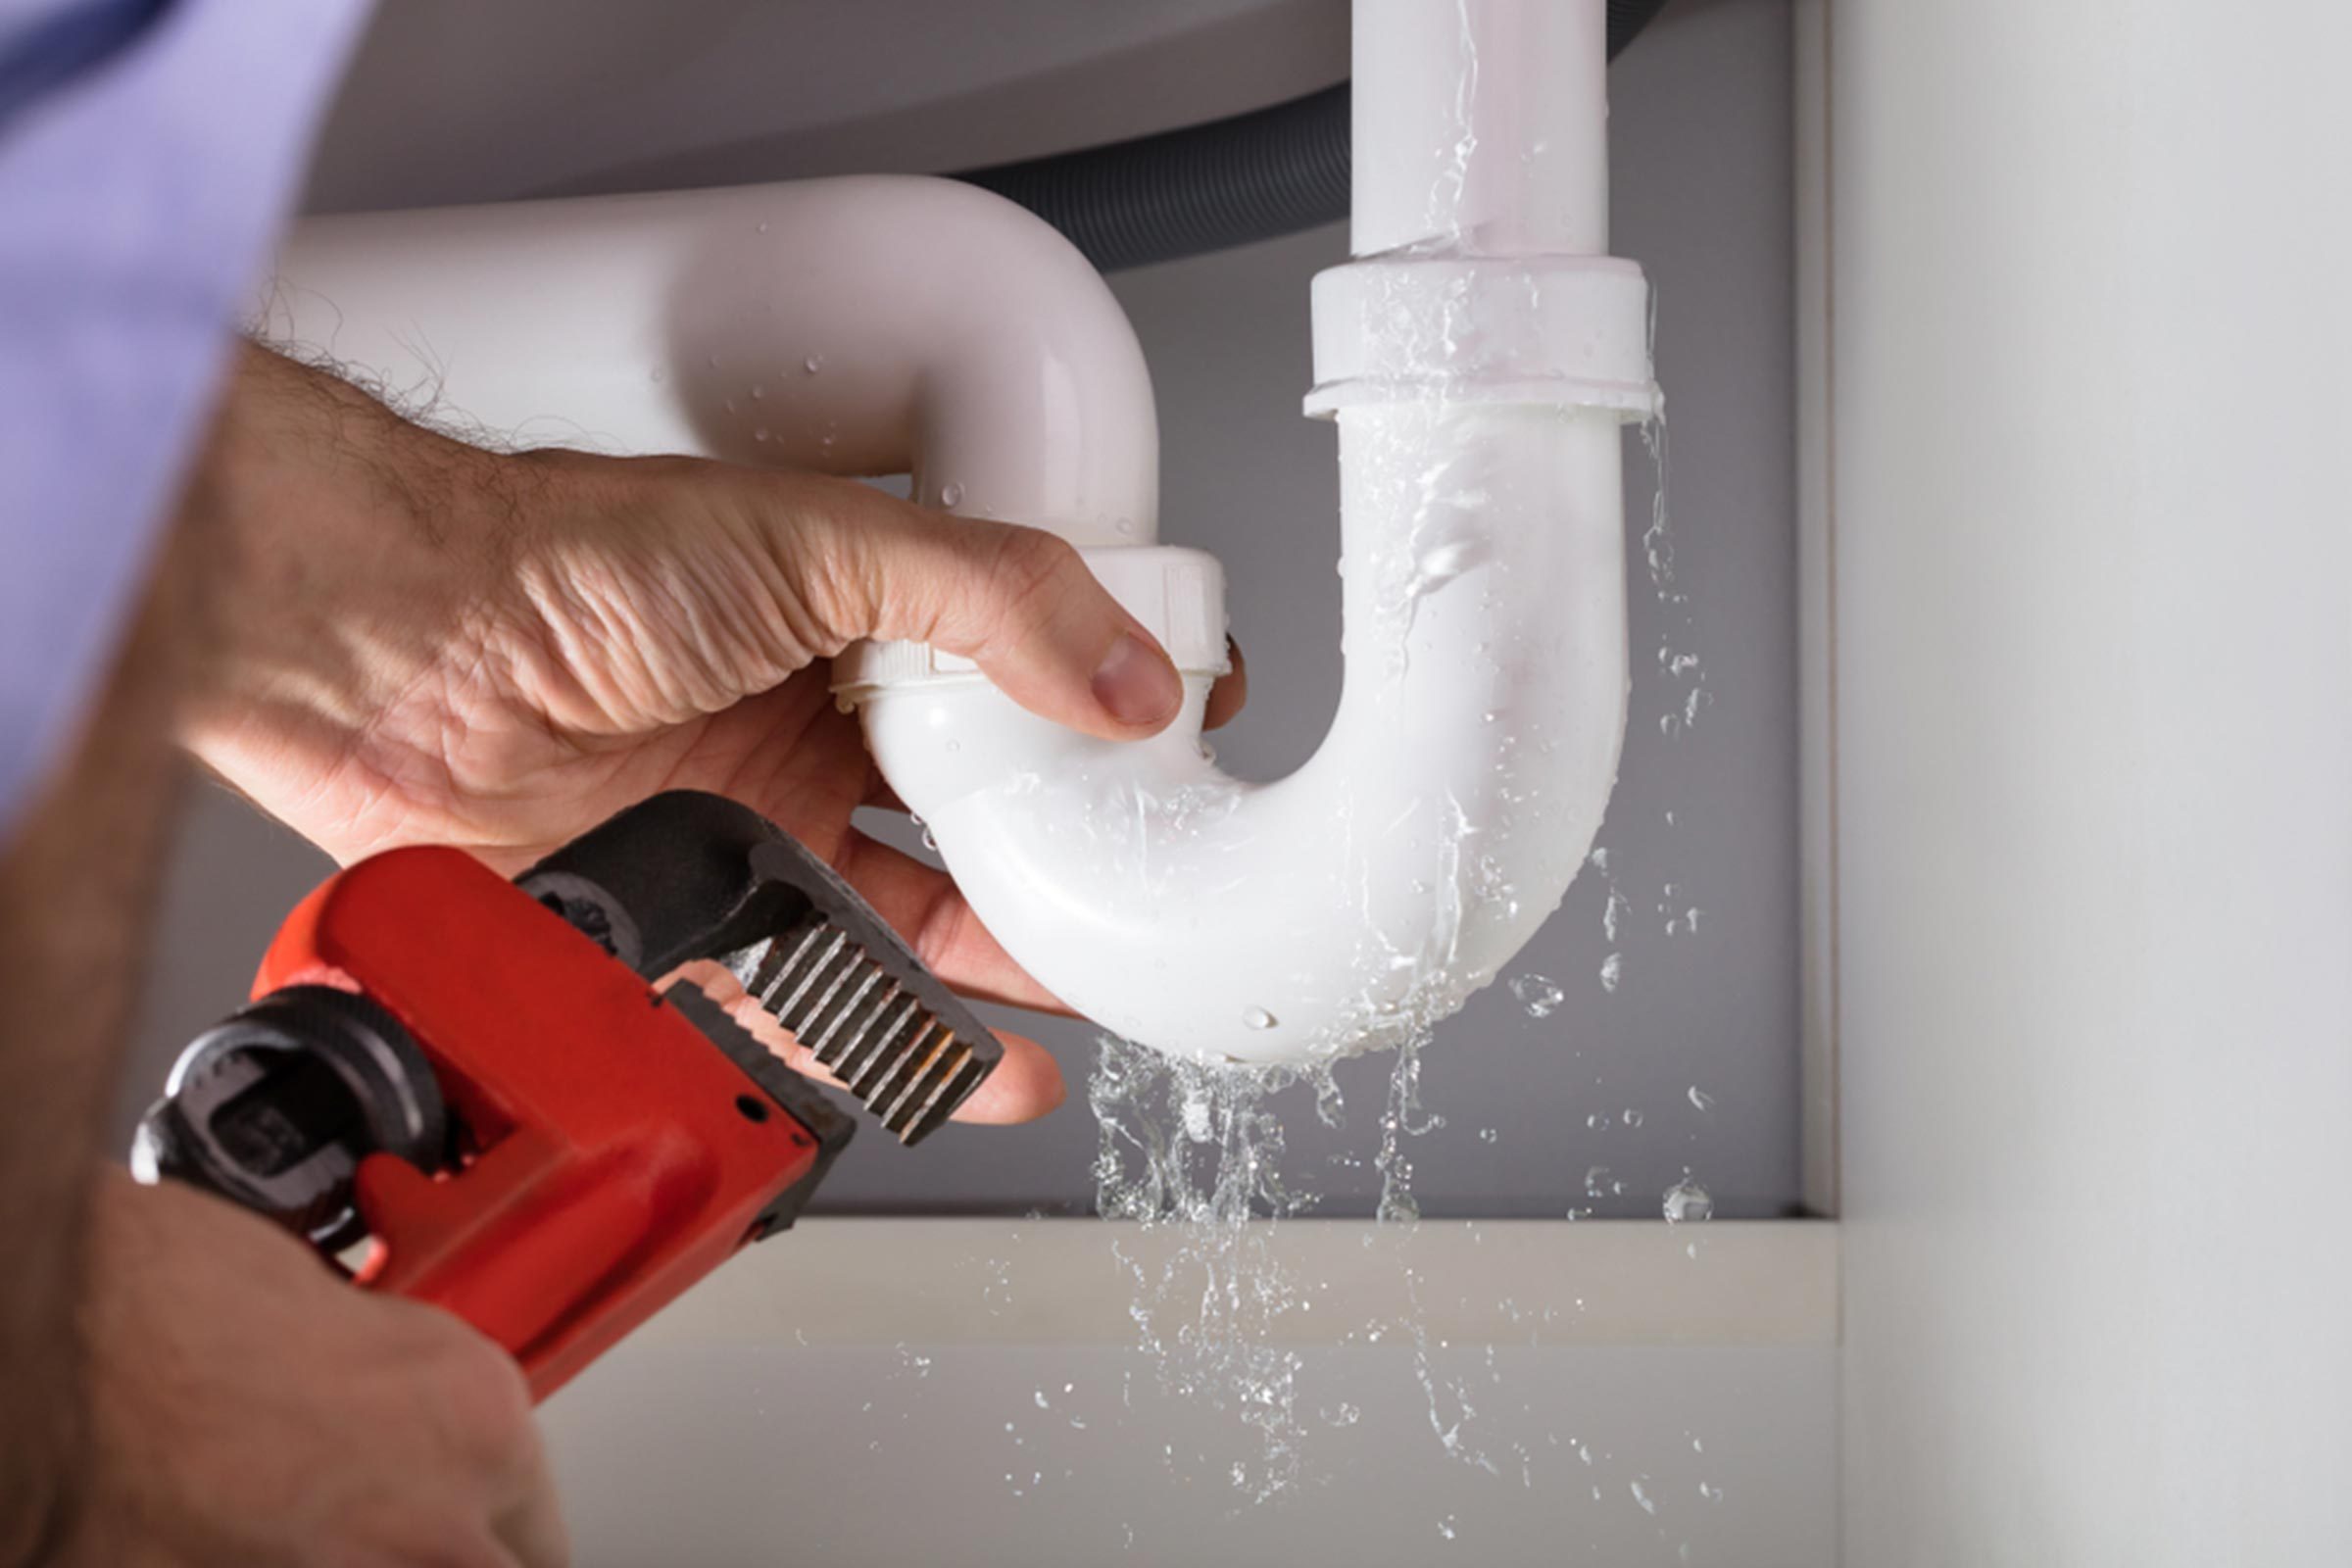 Most Common Plumbing Problems & How to Avoid Them